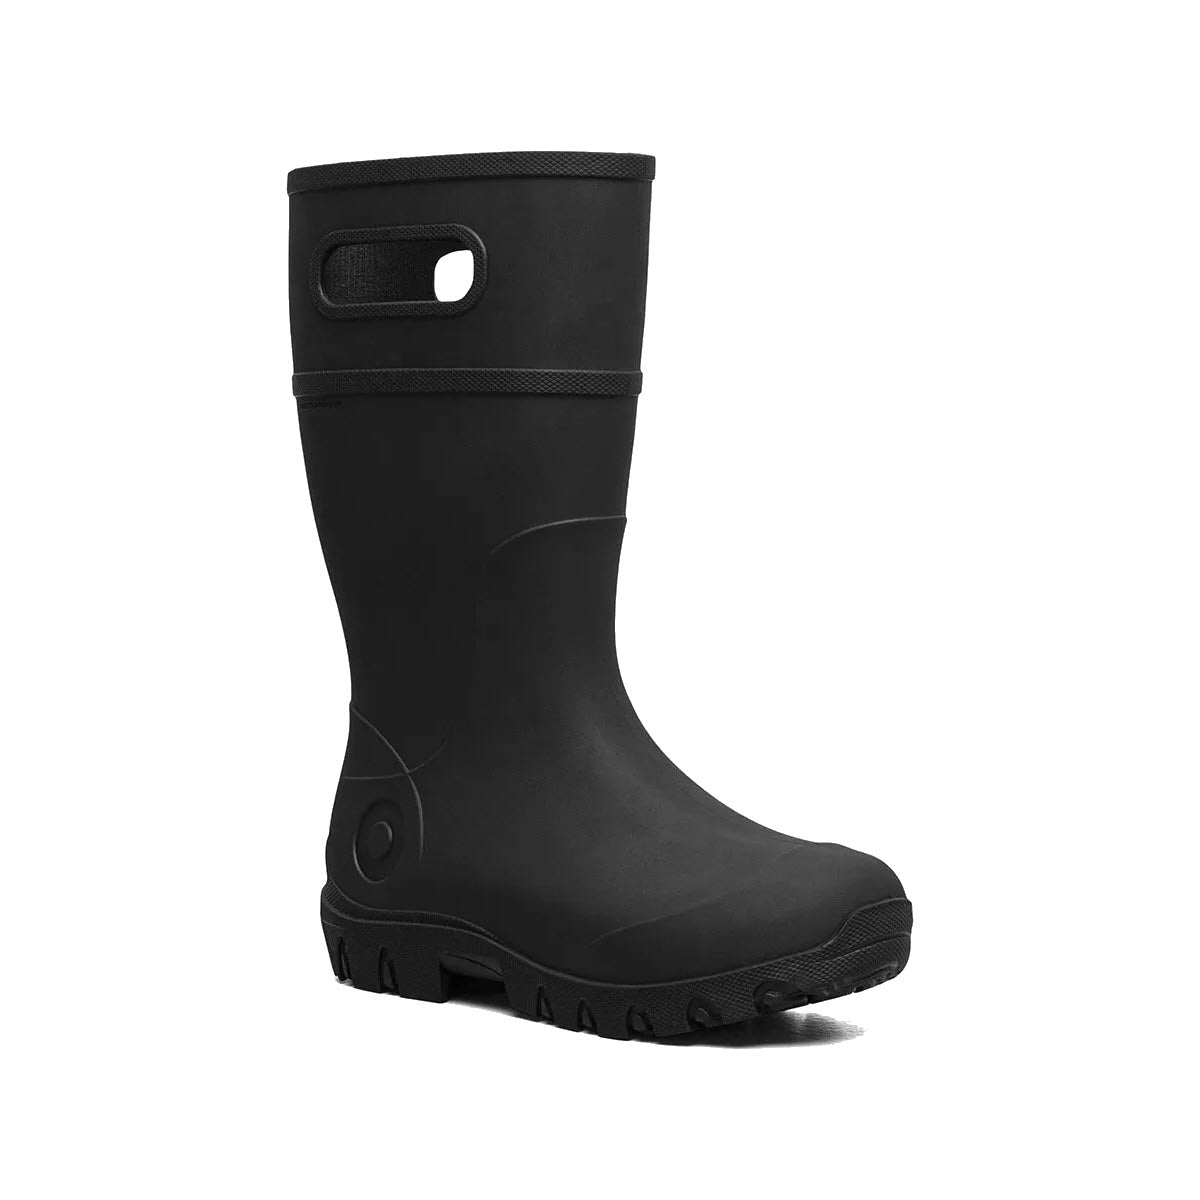 A single black BOGS ESSENTIAL RAIN TALL boot with a handle and waterproof construction on a white background.